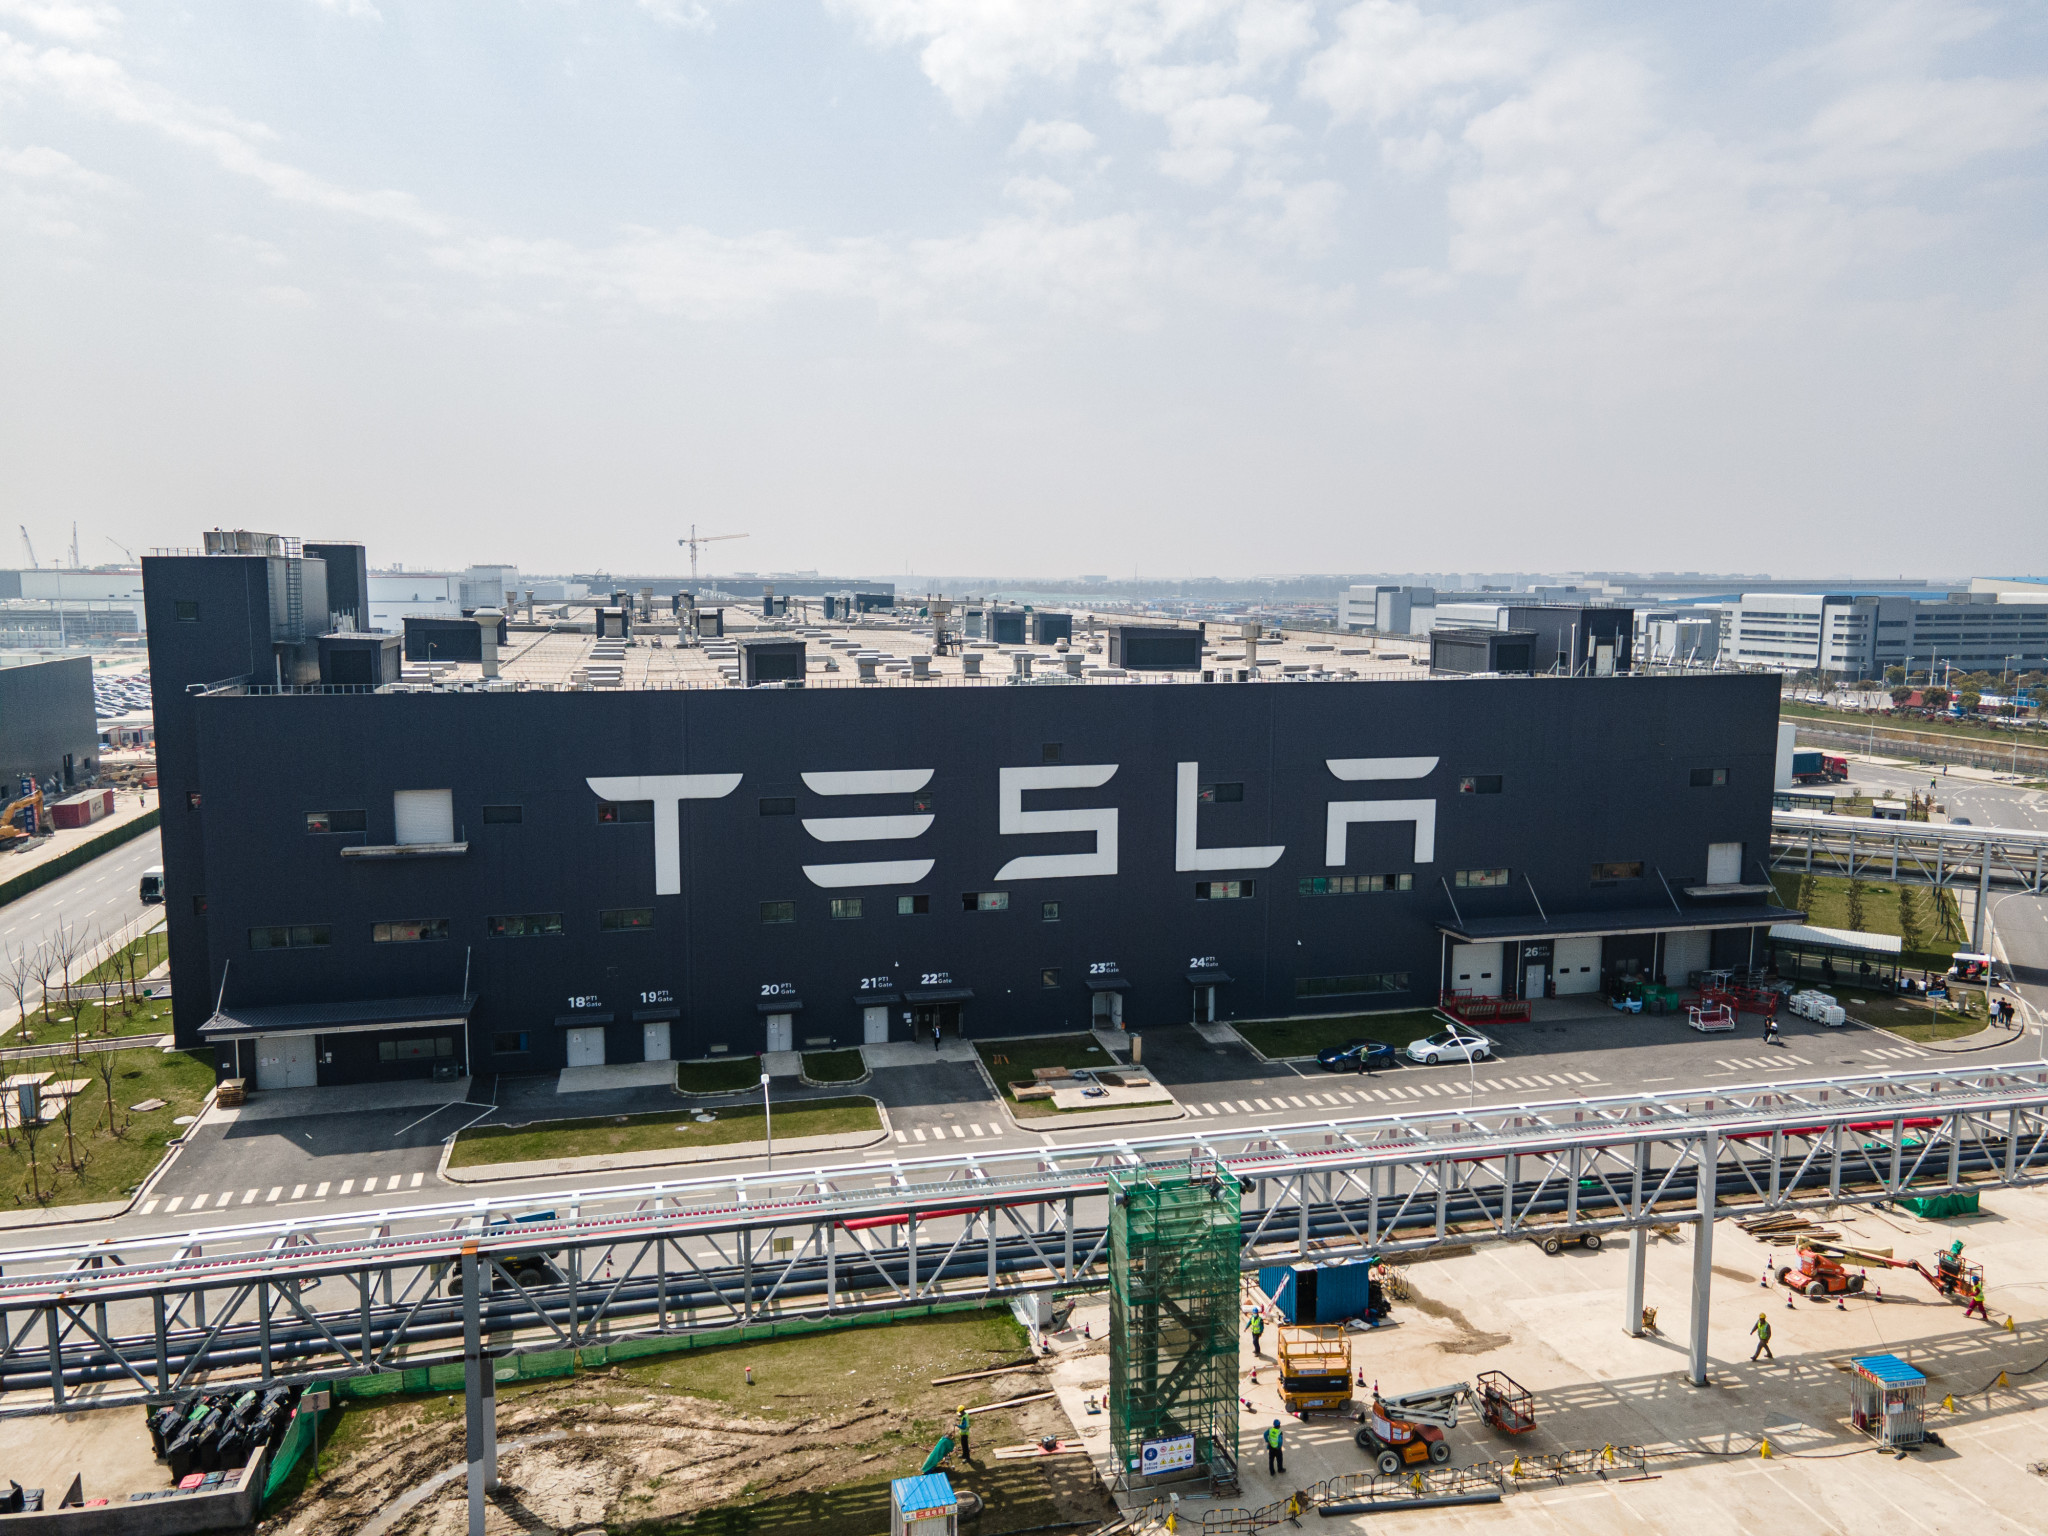 Popular car manufacturer, Tesla, has moved its French headquarters to Saint-Denis. GETTY IMAGES